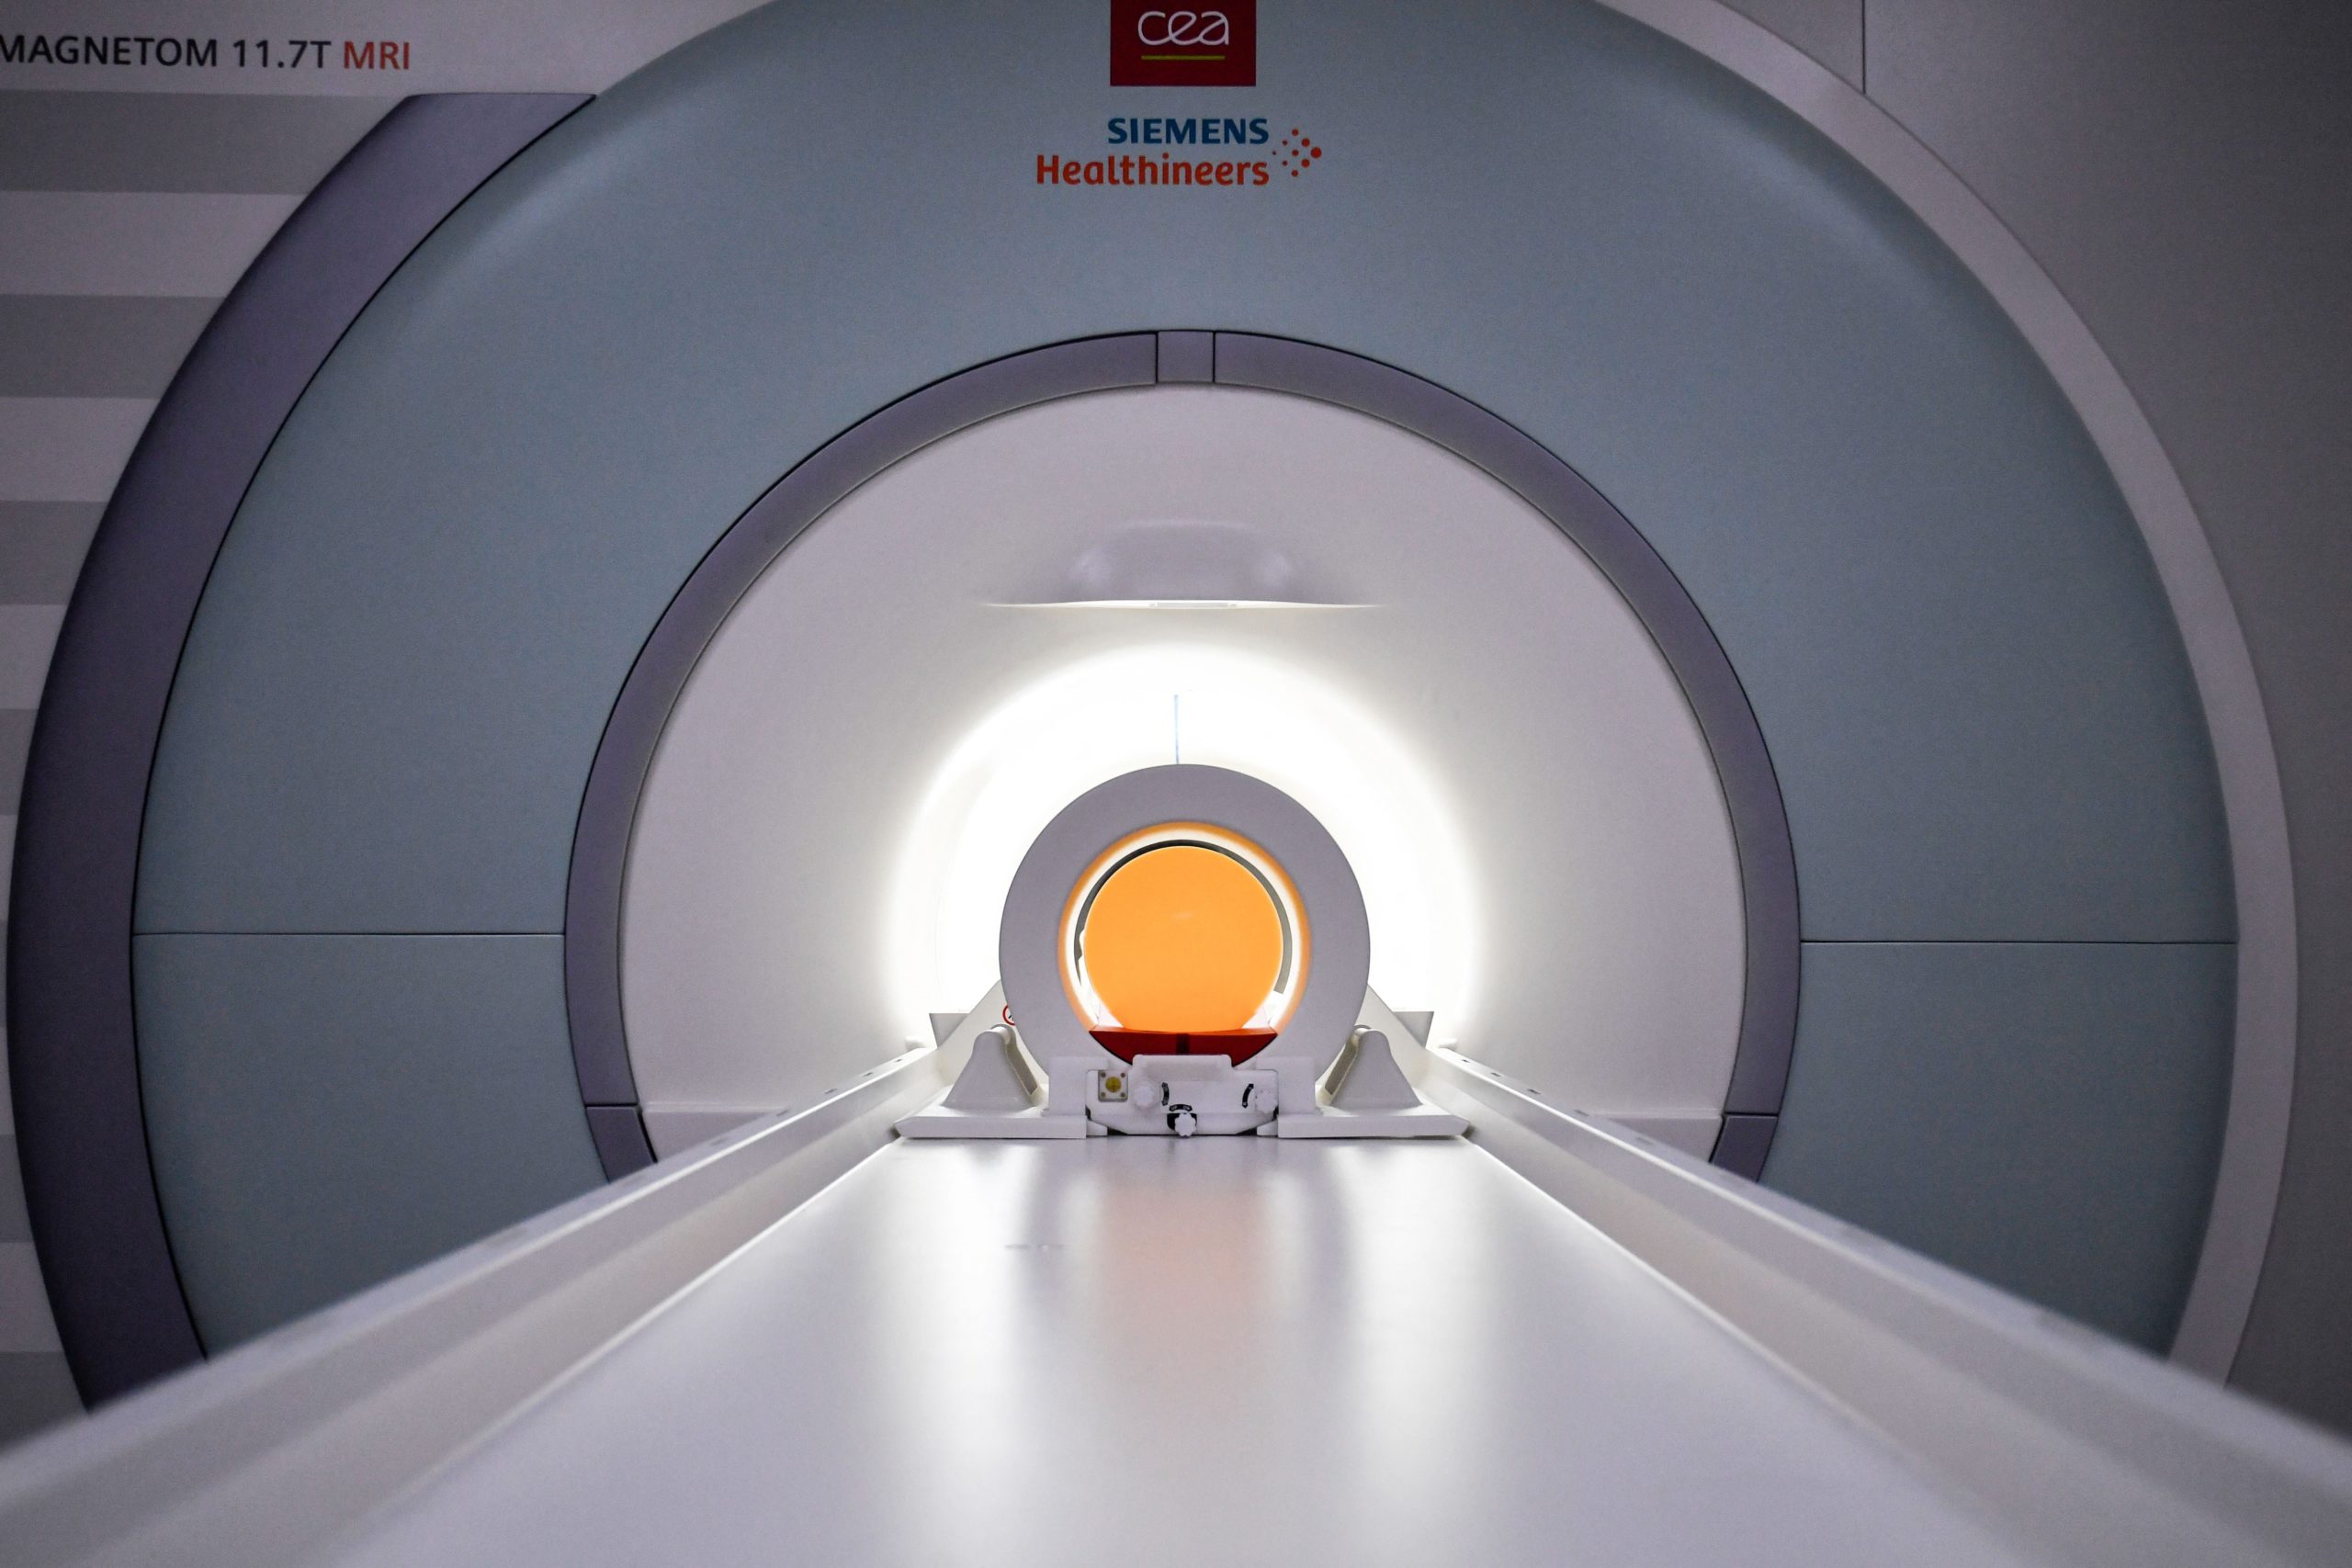 One of the world's most powerful MRIs uses superfluid helium to cool its magnets. (Photo: ALAIN JOCARD/AFP, Getty Images)